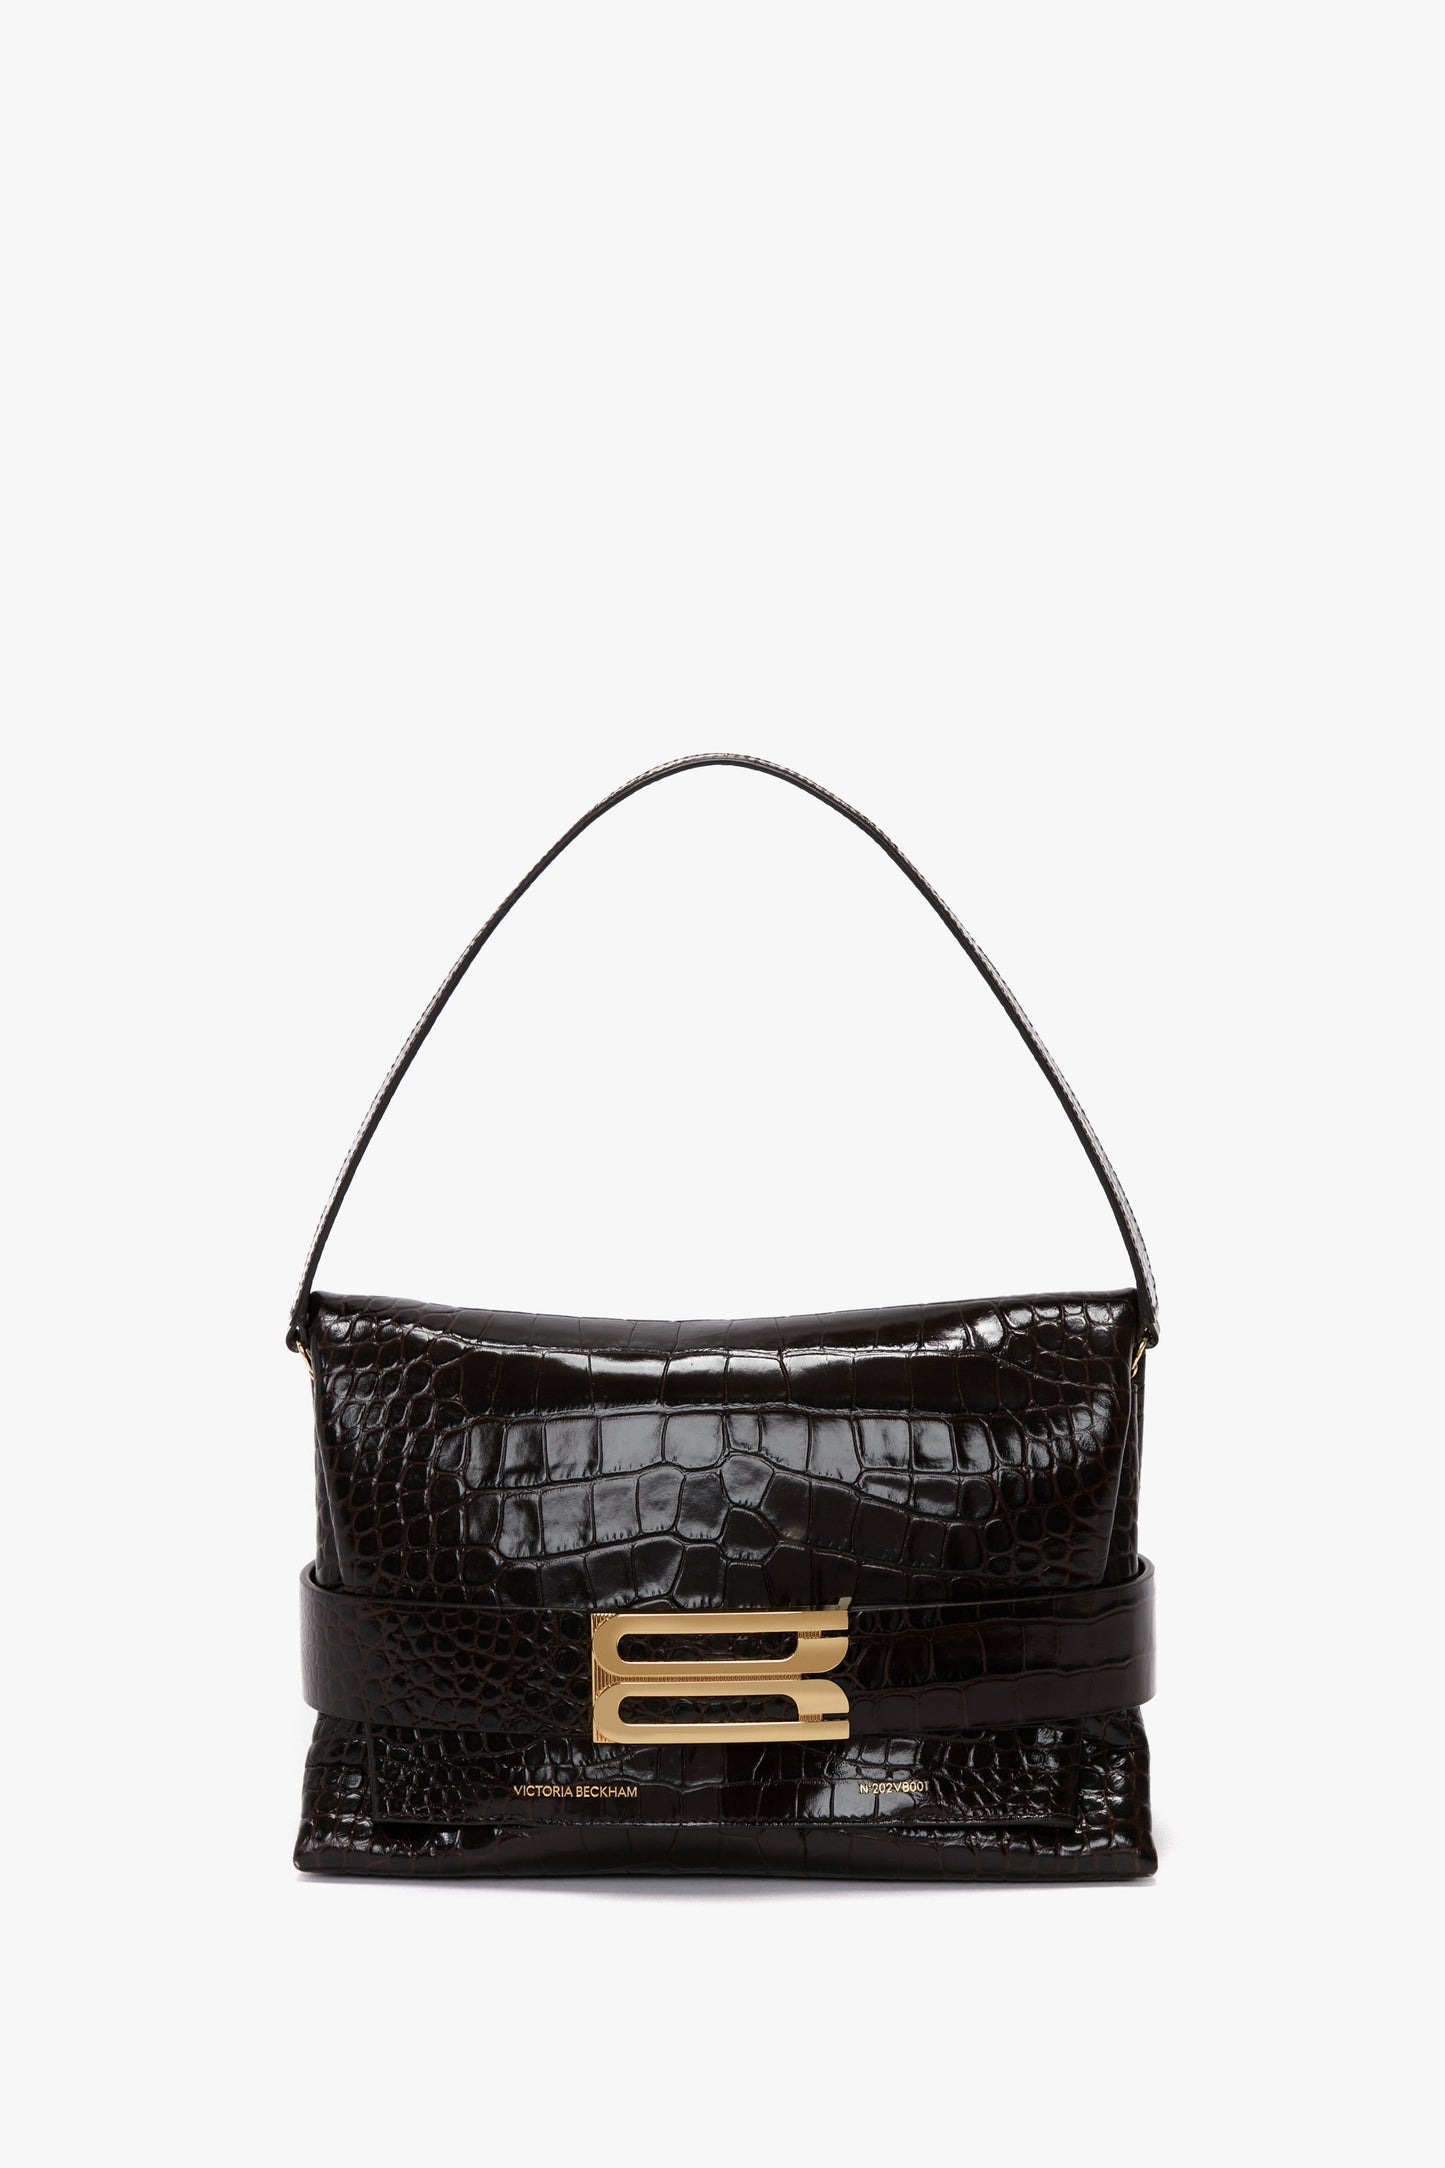 The B Pouch Bag In Croc Effect Espresso Leather from Victoria Beckham features an embossed crocodile print, a detachable shoulder strap, and a gold-tone rectangular buckle detail on the front.